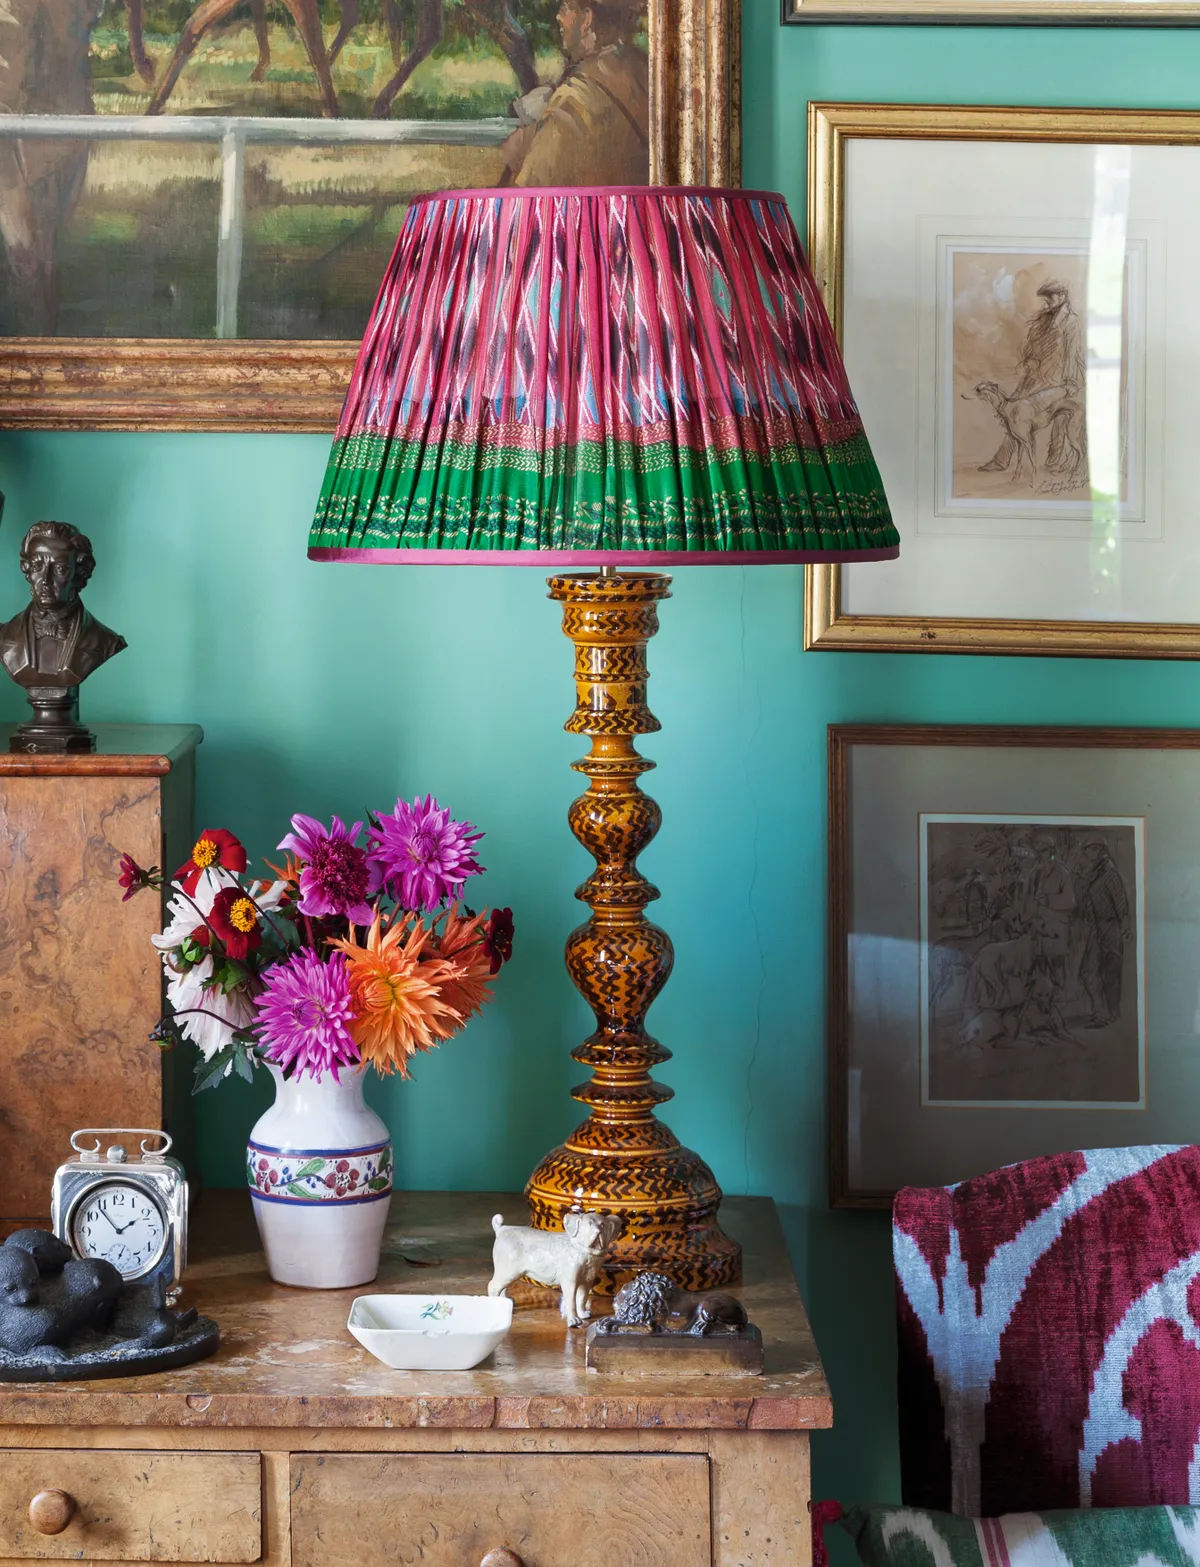 A ruched lampshade on a wooden table lamp against a teal coloured wall